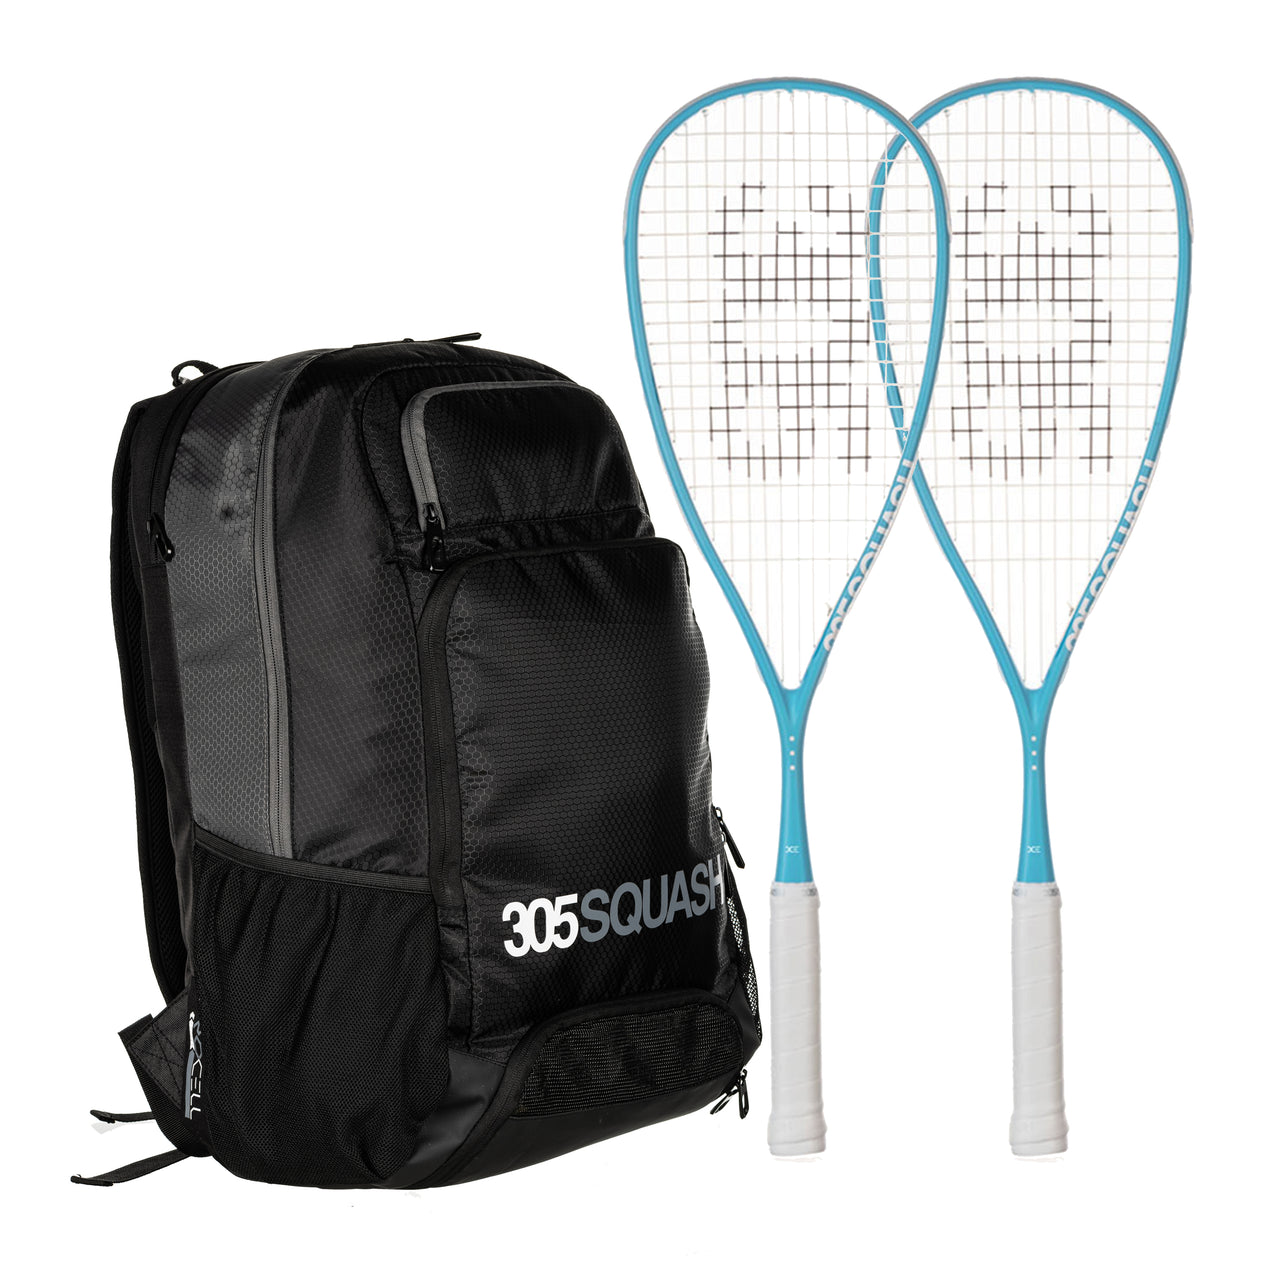 305SQUASH ProCell™ XE110 Squash Racket + ProCell™ BackpackXL - 2 RACKET + BACKPACK BUNDLE